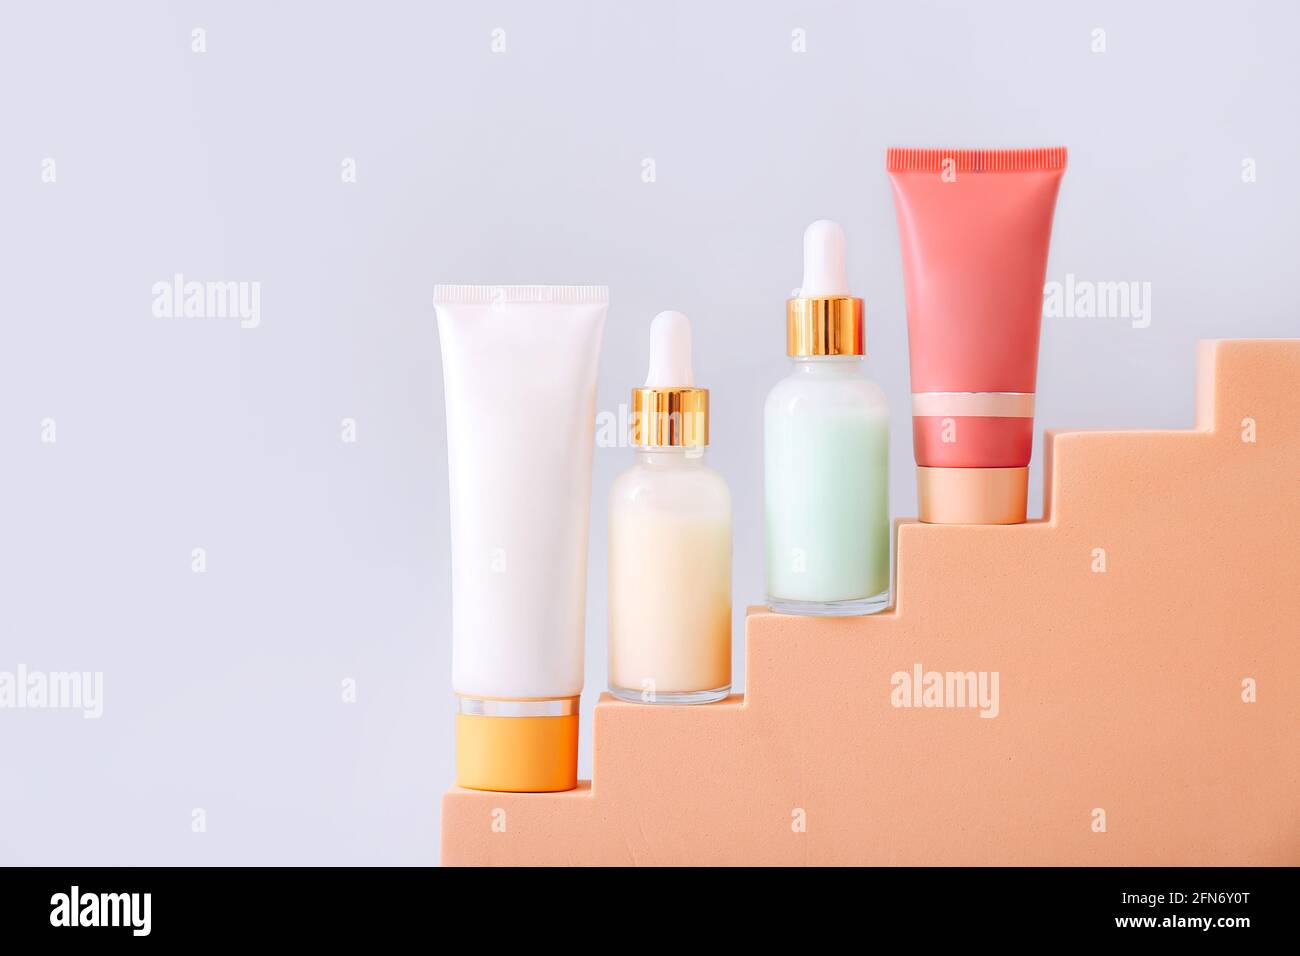 Cosmetic product presentation on geometric podium on grey background. Beauty and body care product concept. Stock Photo